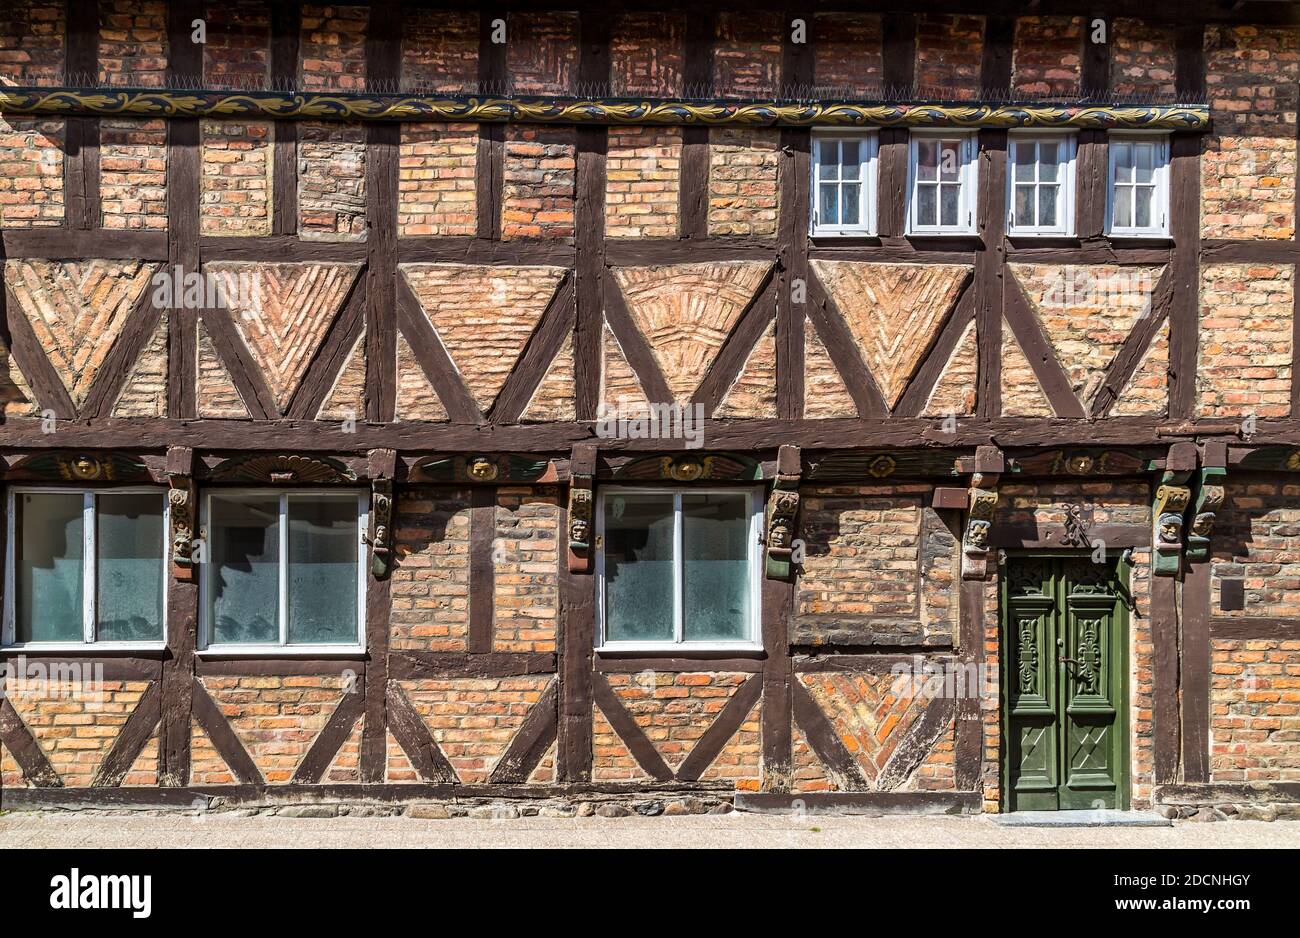 Facade of a historic half timbered house with bricks in various patterns, carved ornaments, and a green door in Ystad, Sweden. Stock Photo